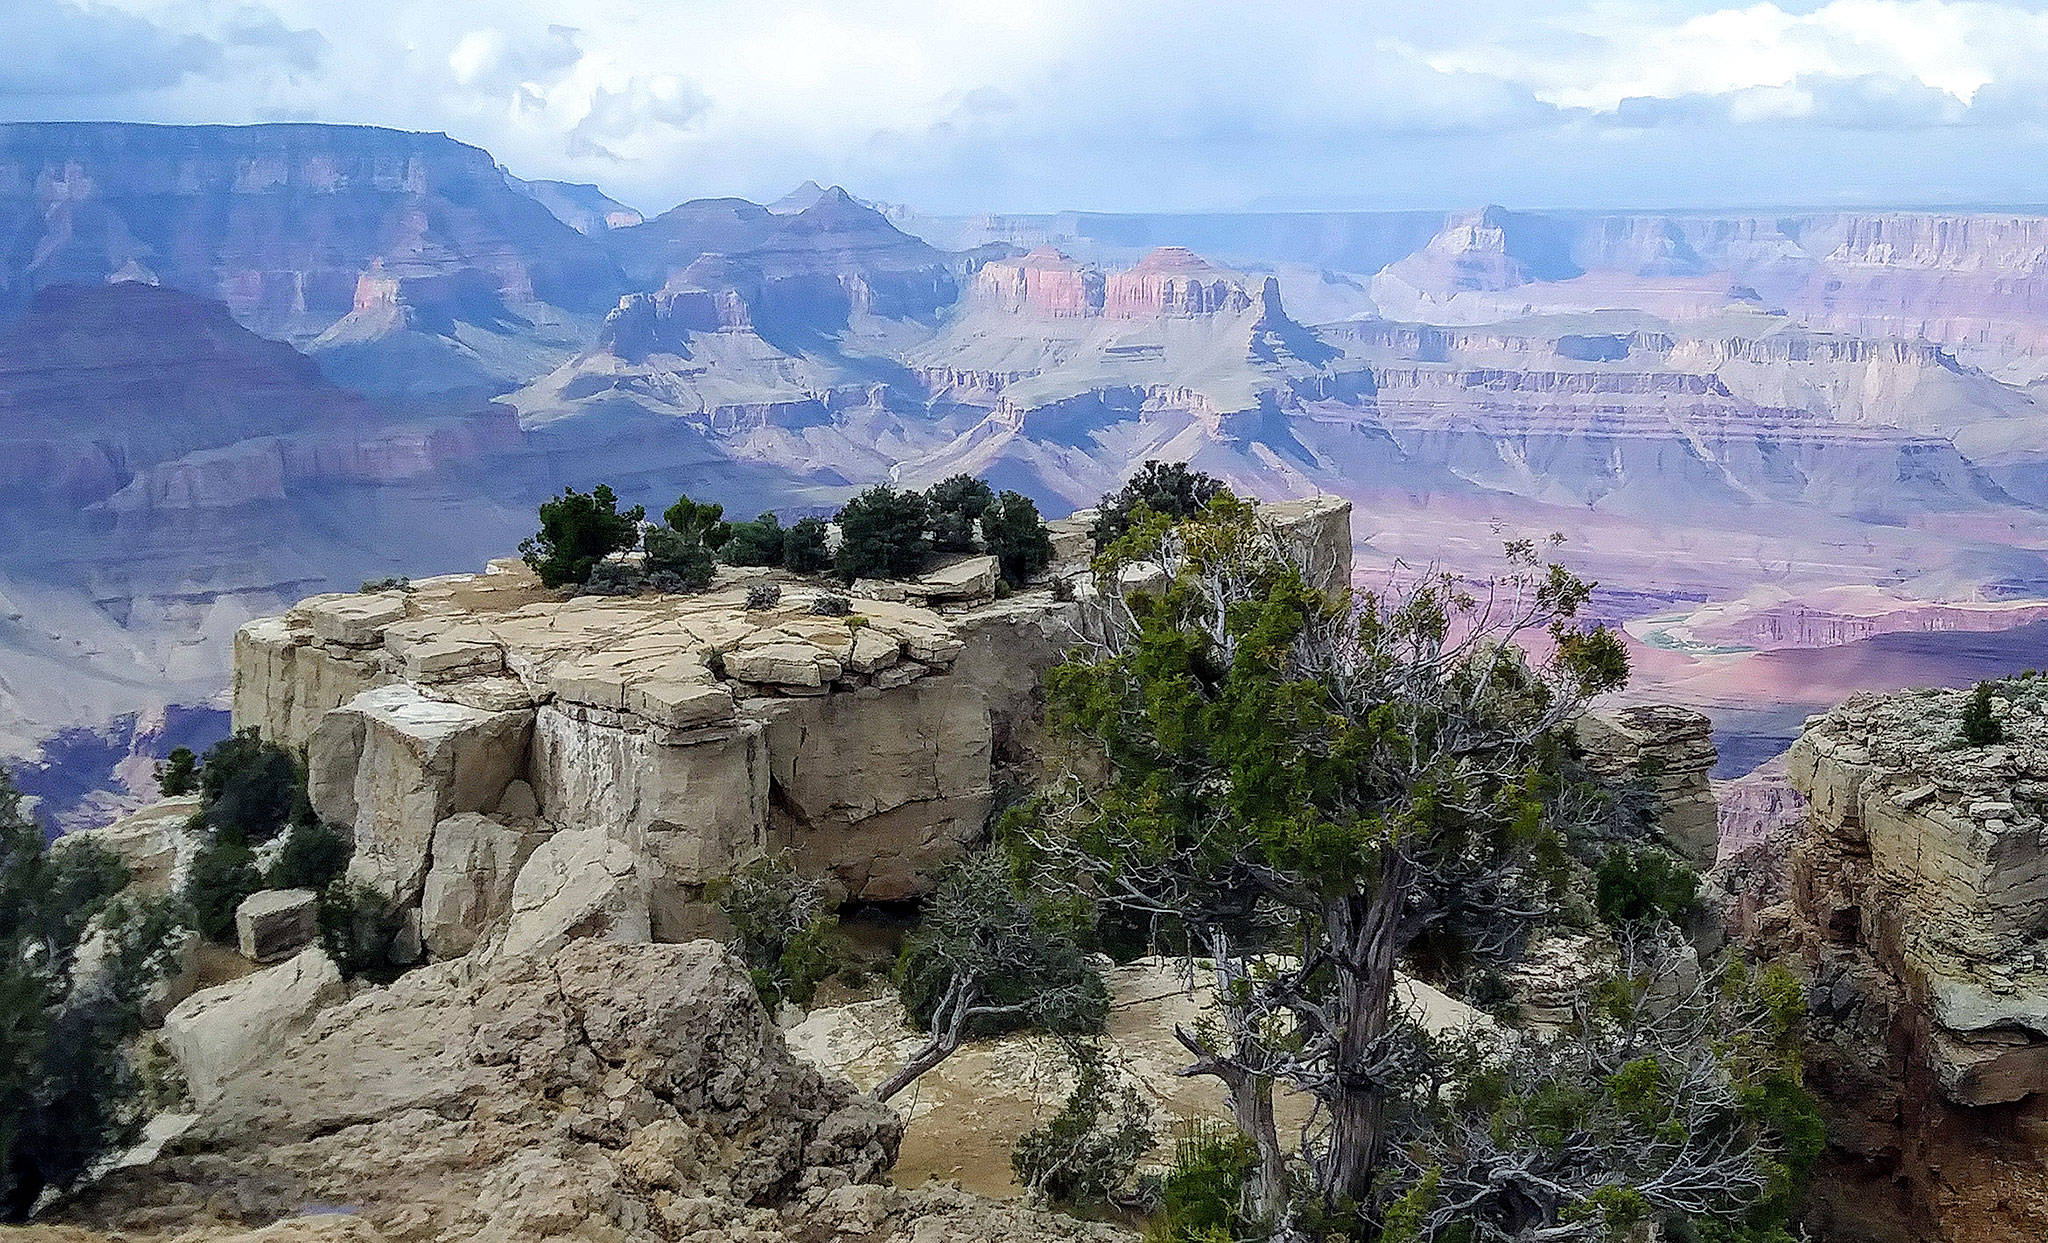 A view of the Grand Canyon from an overlook on Desert View Drive.